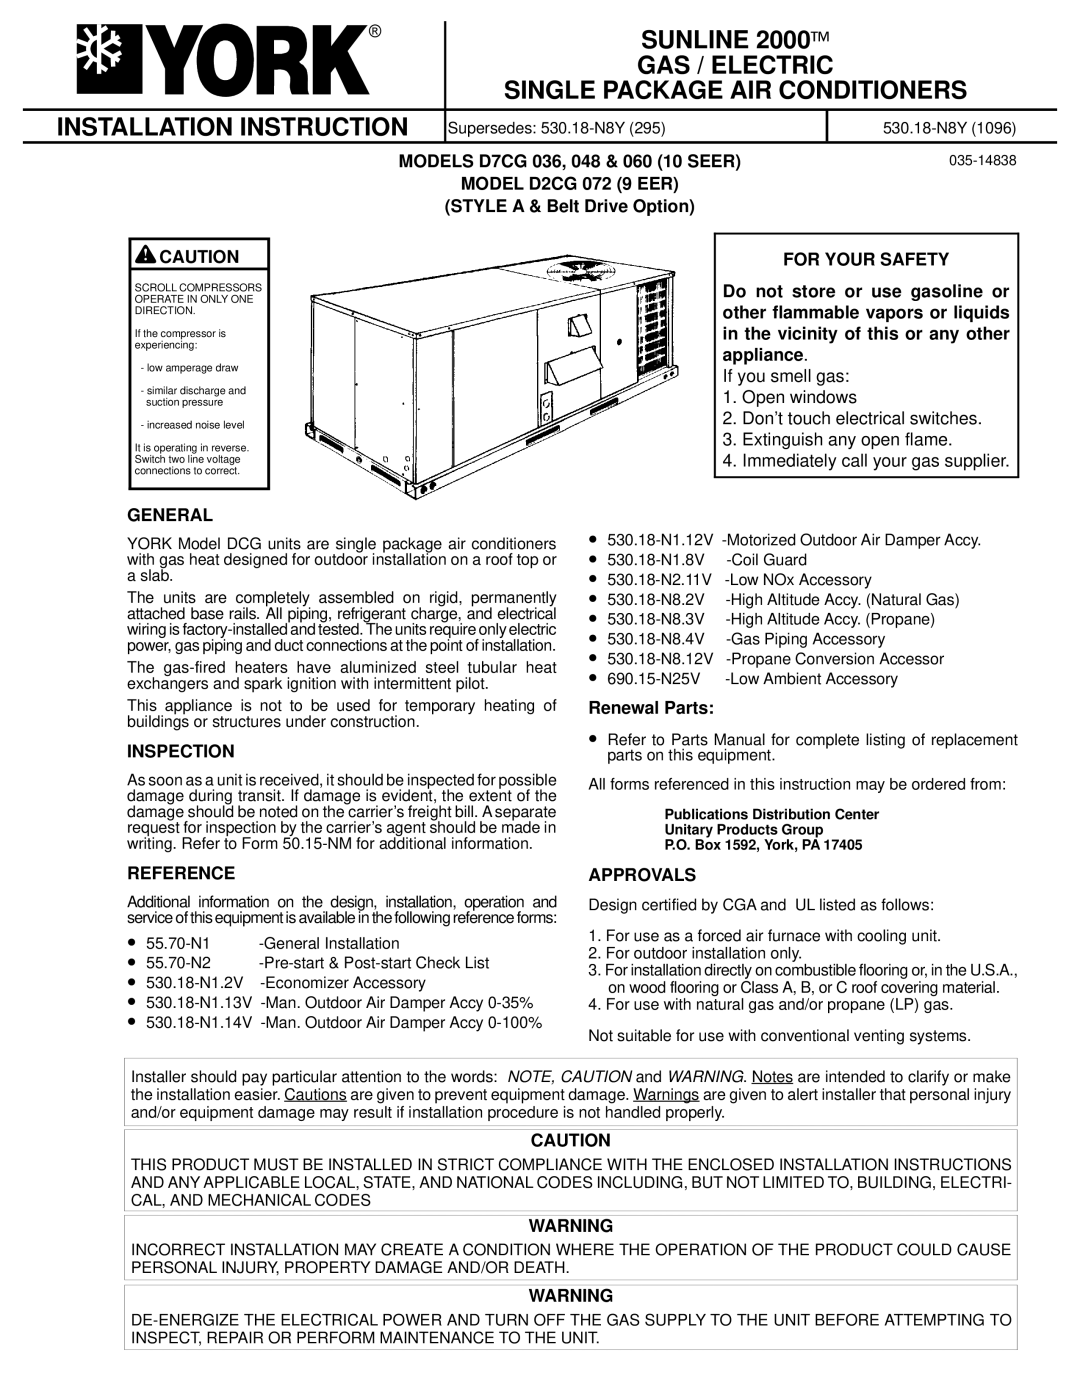 York D7CG 048 installation instructions Sunline, Single Package Air Conditioners, Installation Instruction, appliance 